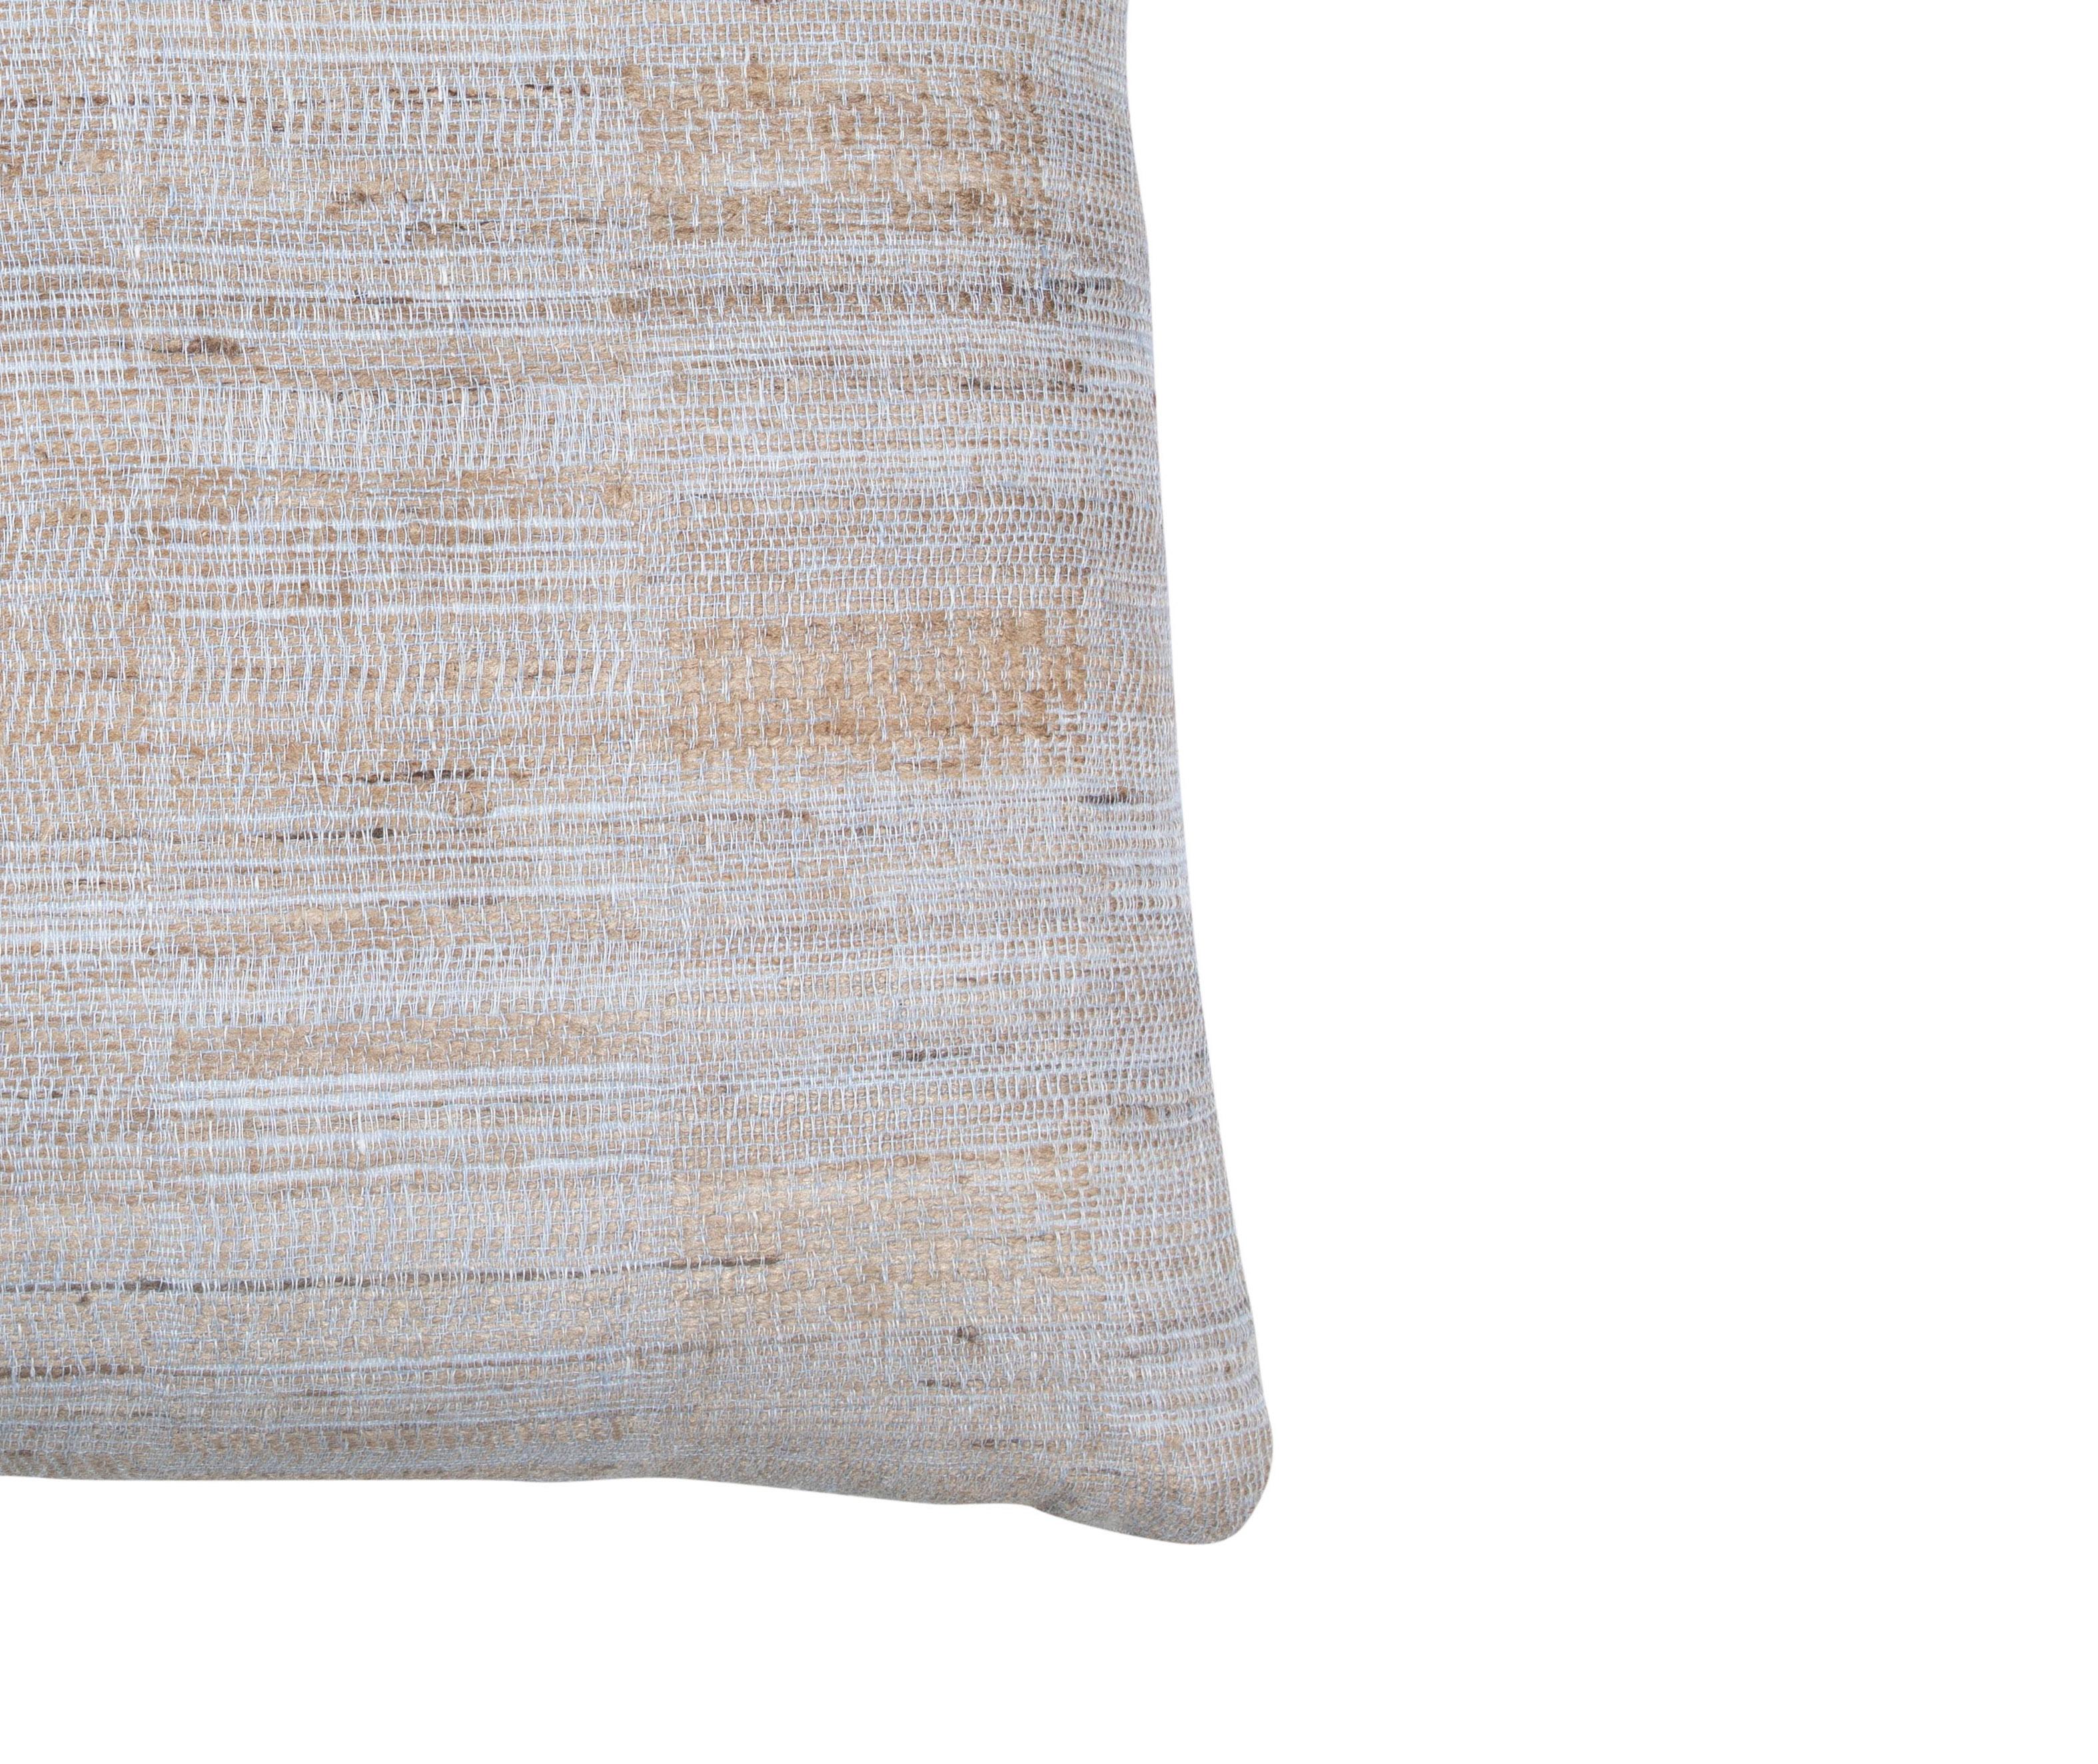 Indian Handwoven Pillow Ice Blue & Tan In New Condition For Sale In Los Angeles, CA